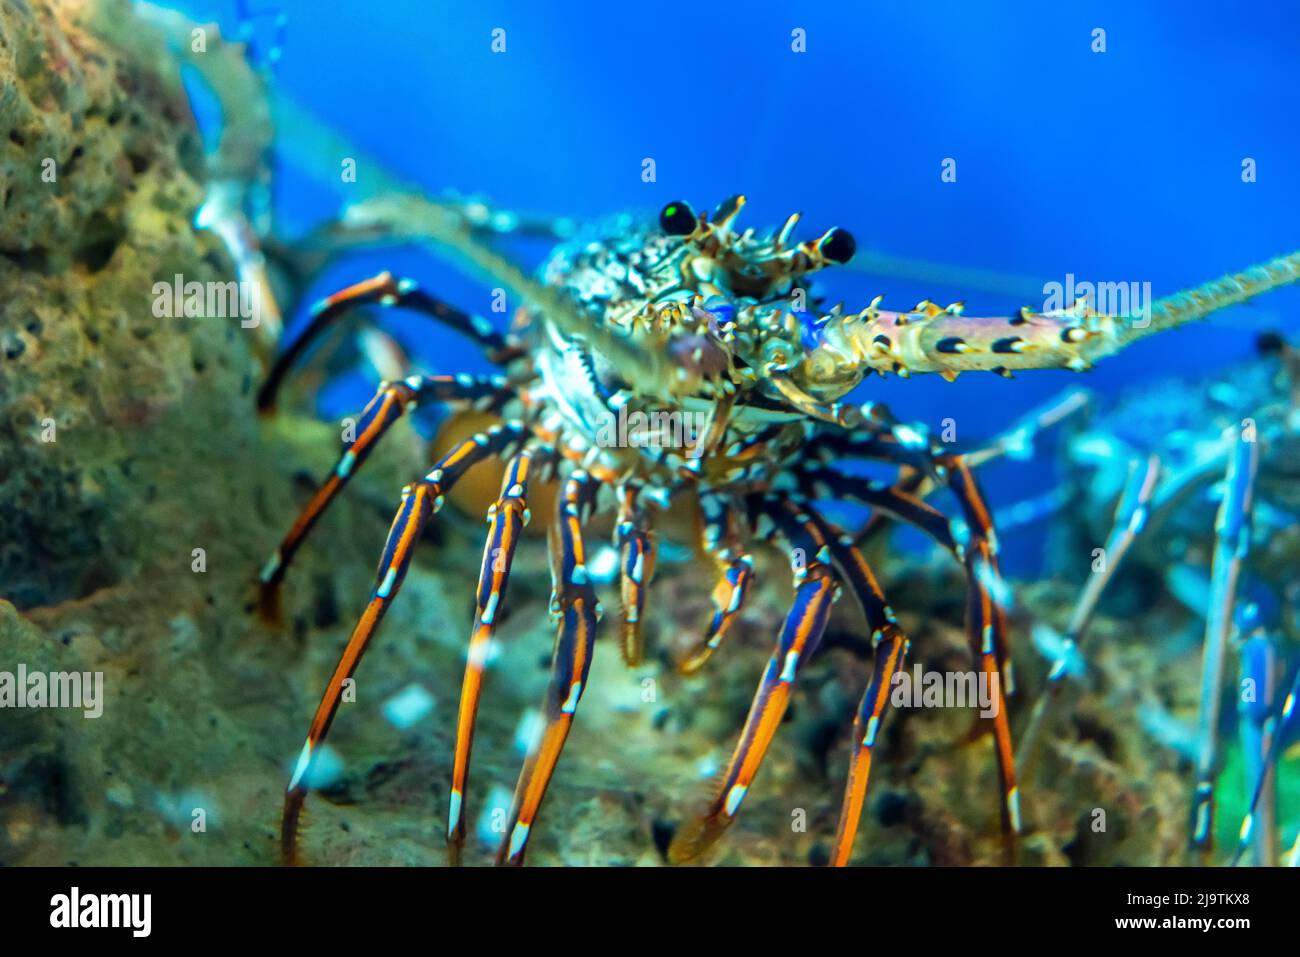 The sea shrimp in the aquarium, this is a crustacean that needs to be preserved Stock Photo